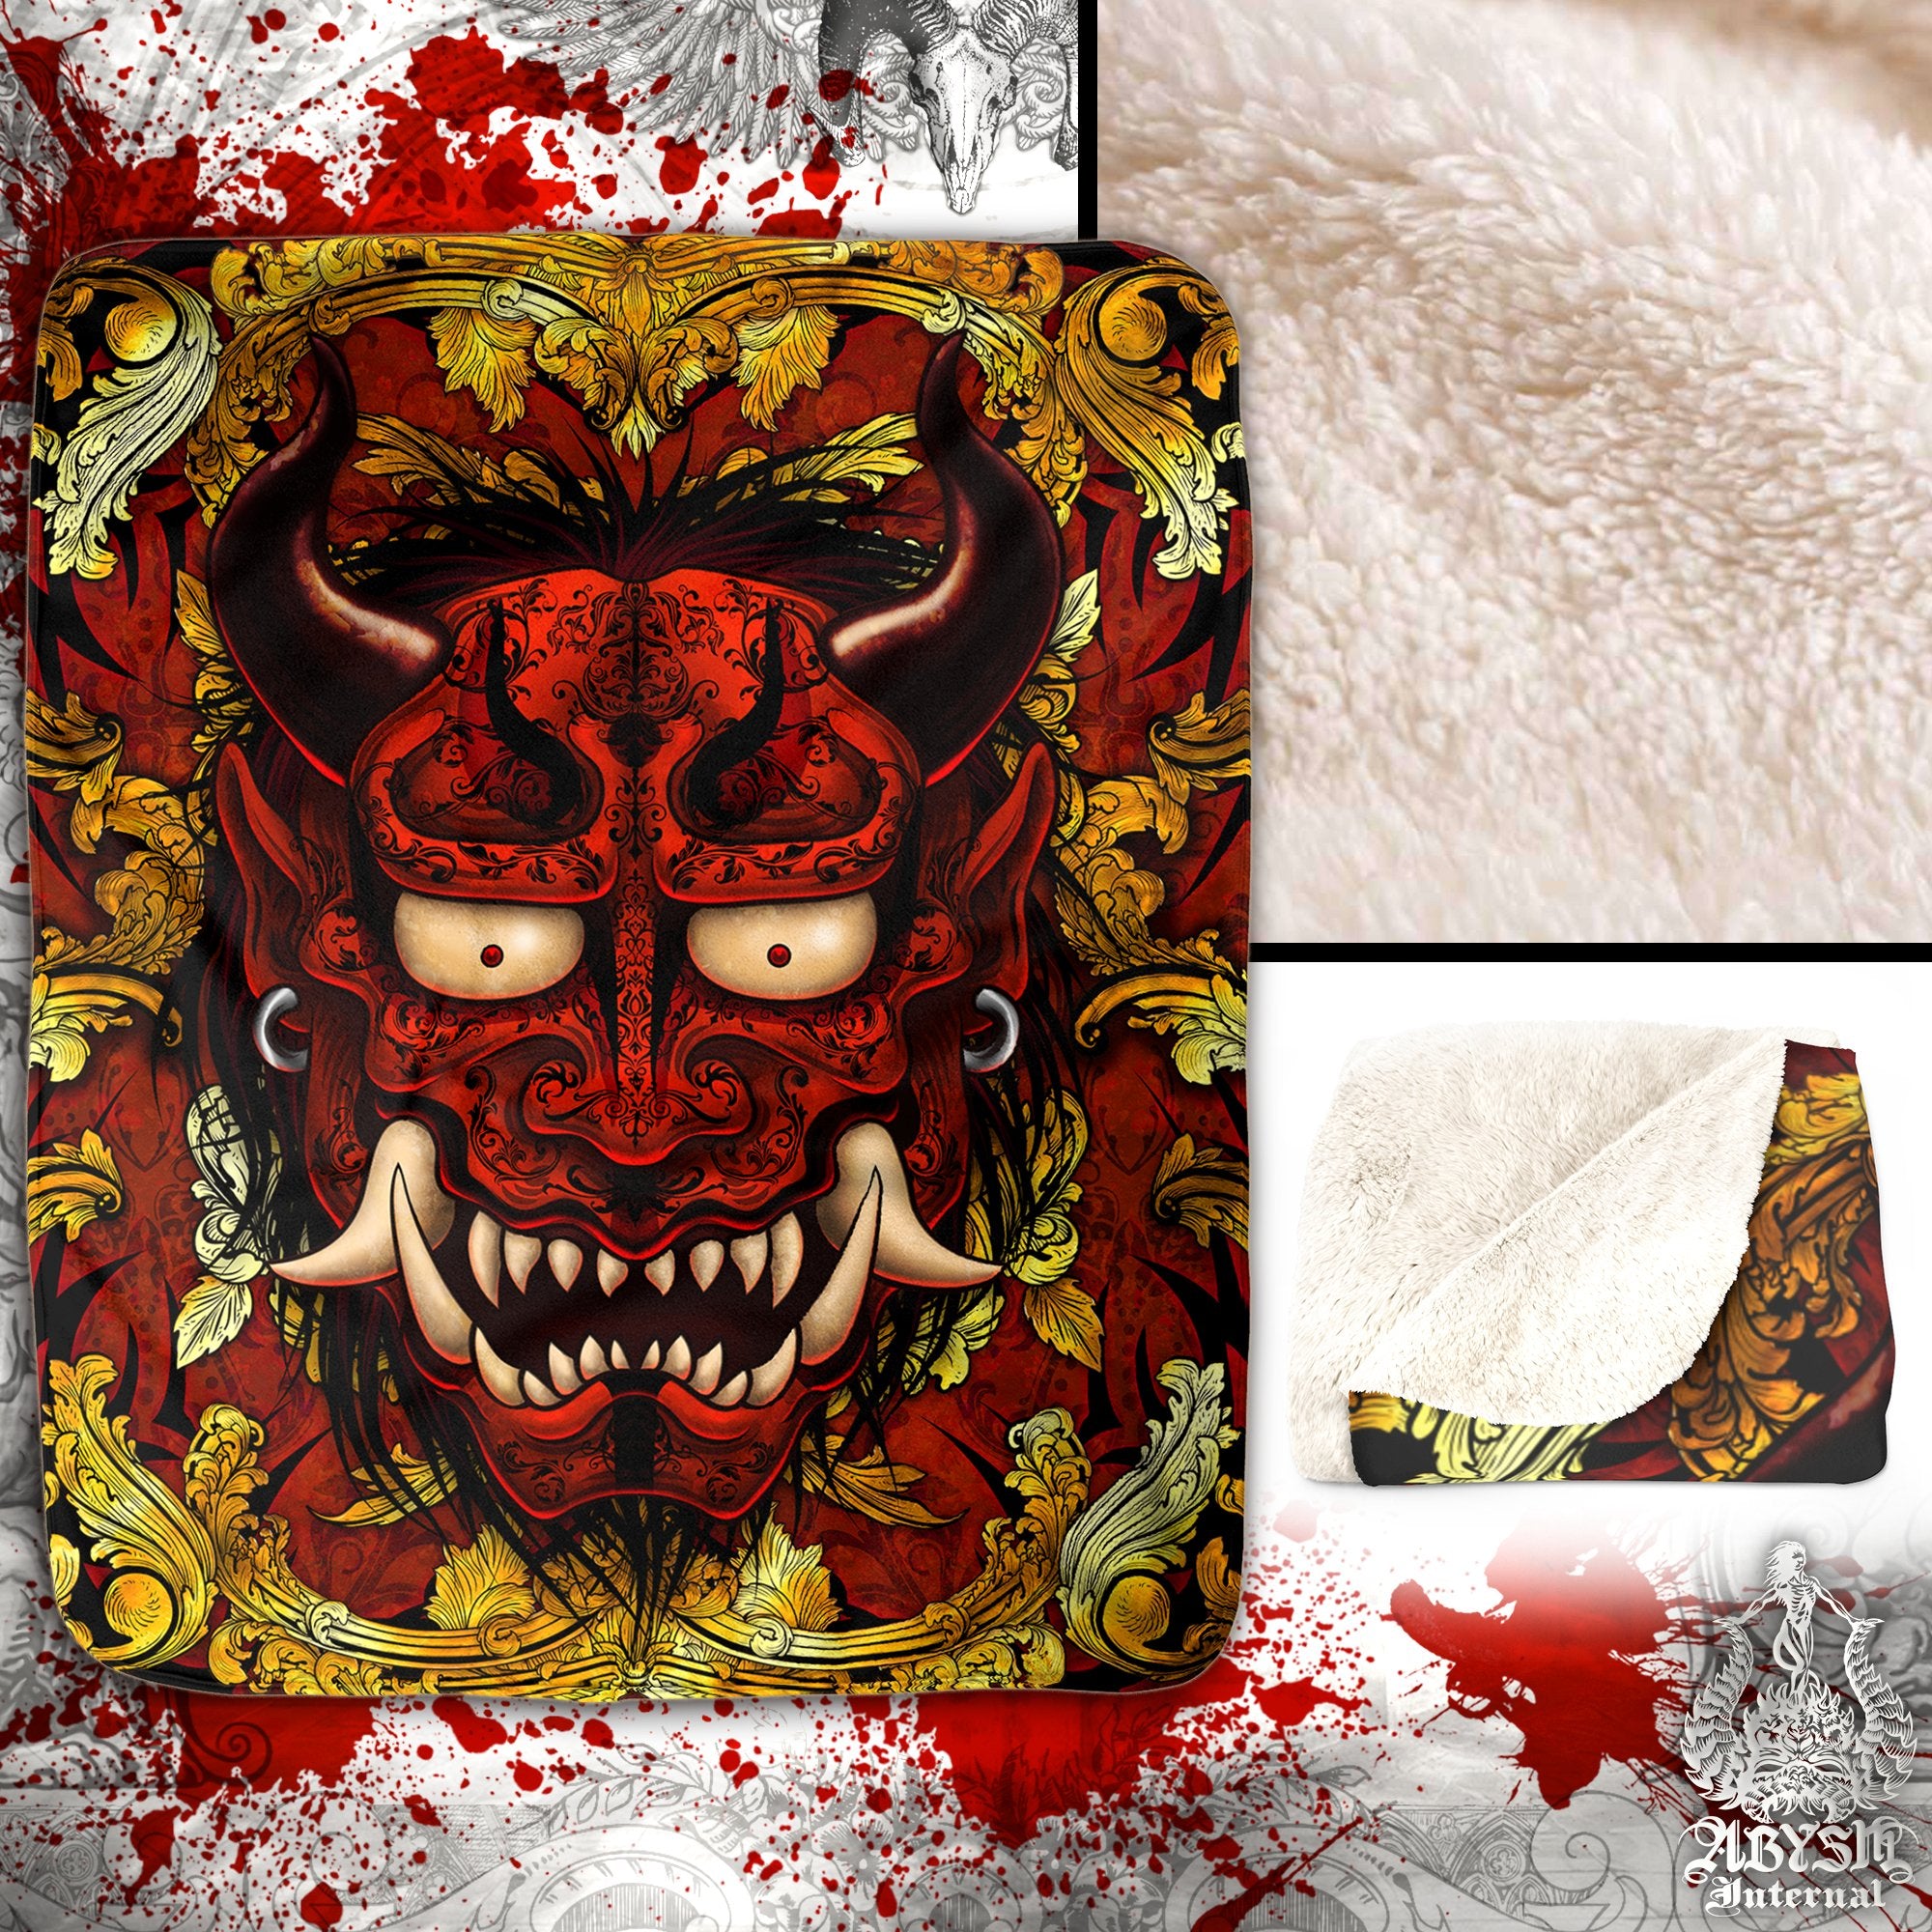 Gold Oni Sherpa Fleece Throw Blanket, Japanese Demon, Alternative and Goth Home Decor - Black and Red, 2 Colors - Abysm Internal